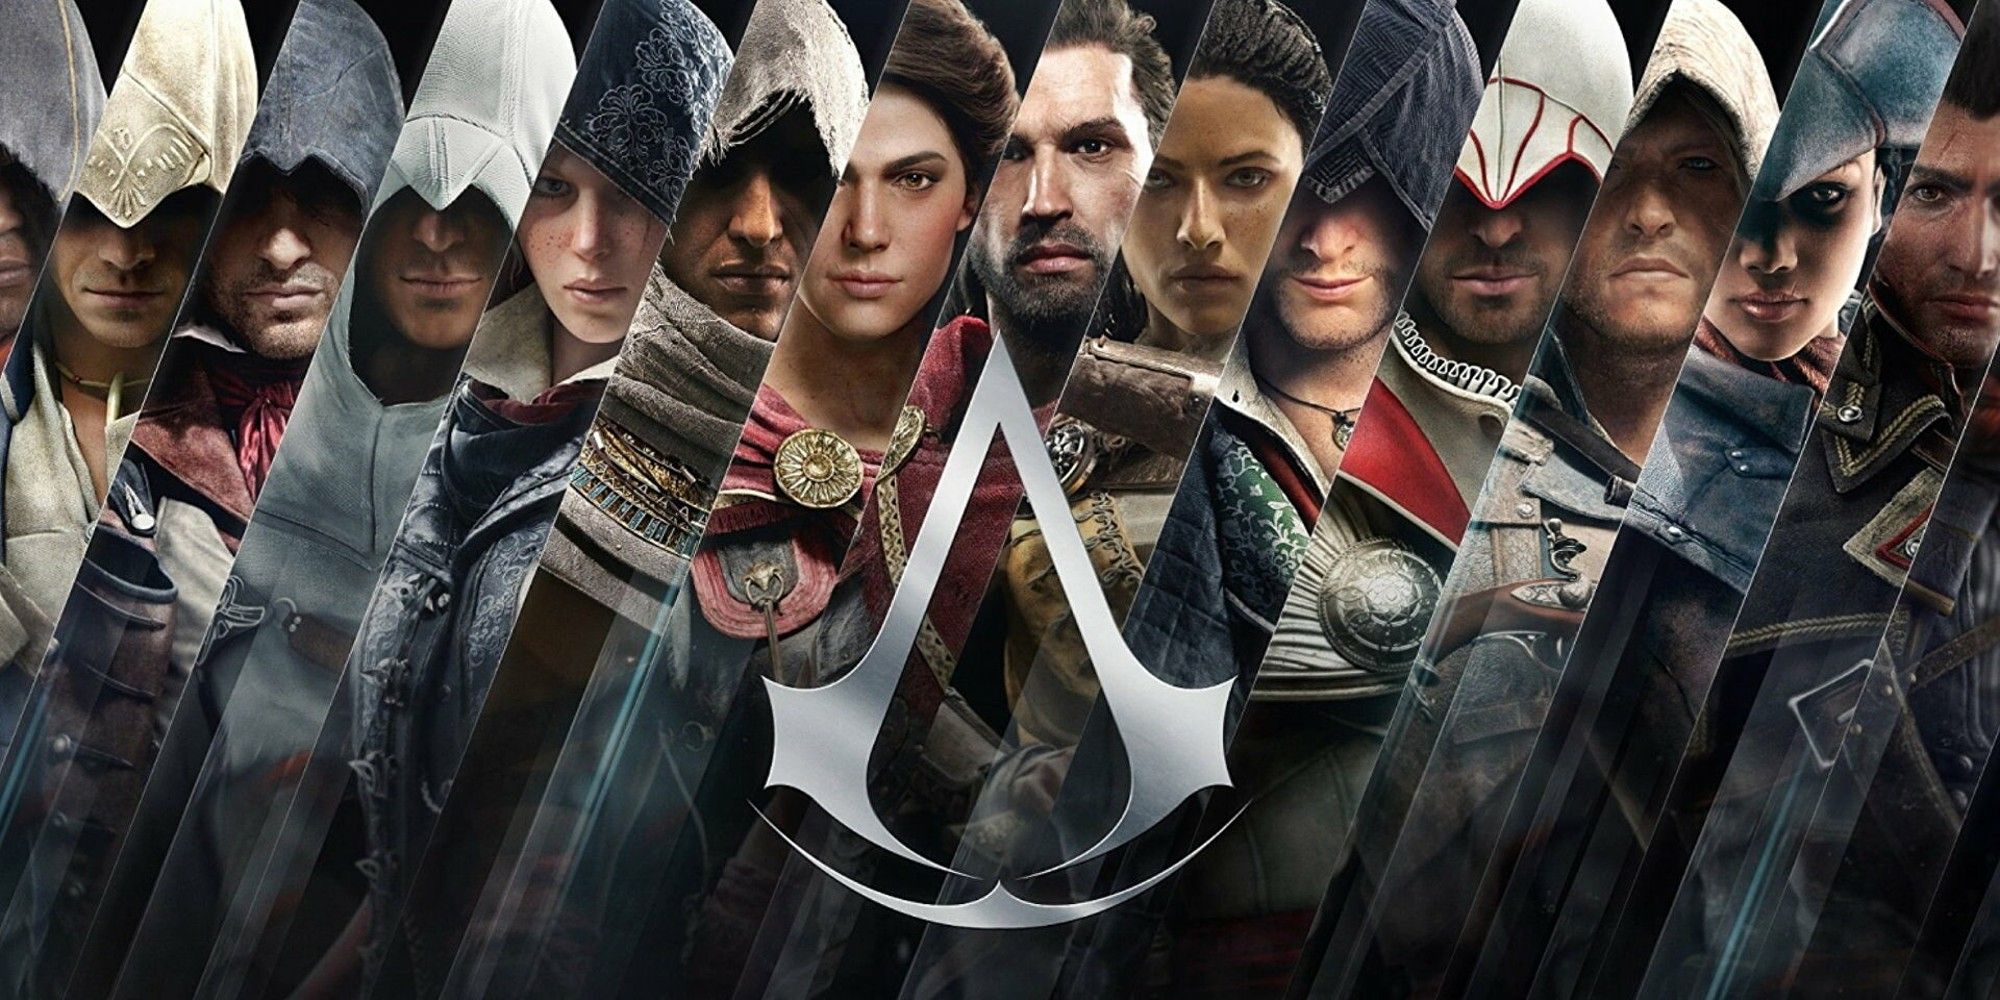 Exclusive - Ubisoft is Going All In on Assassin's Creed With 4